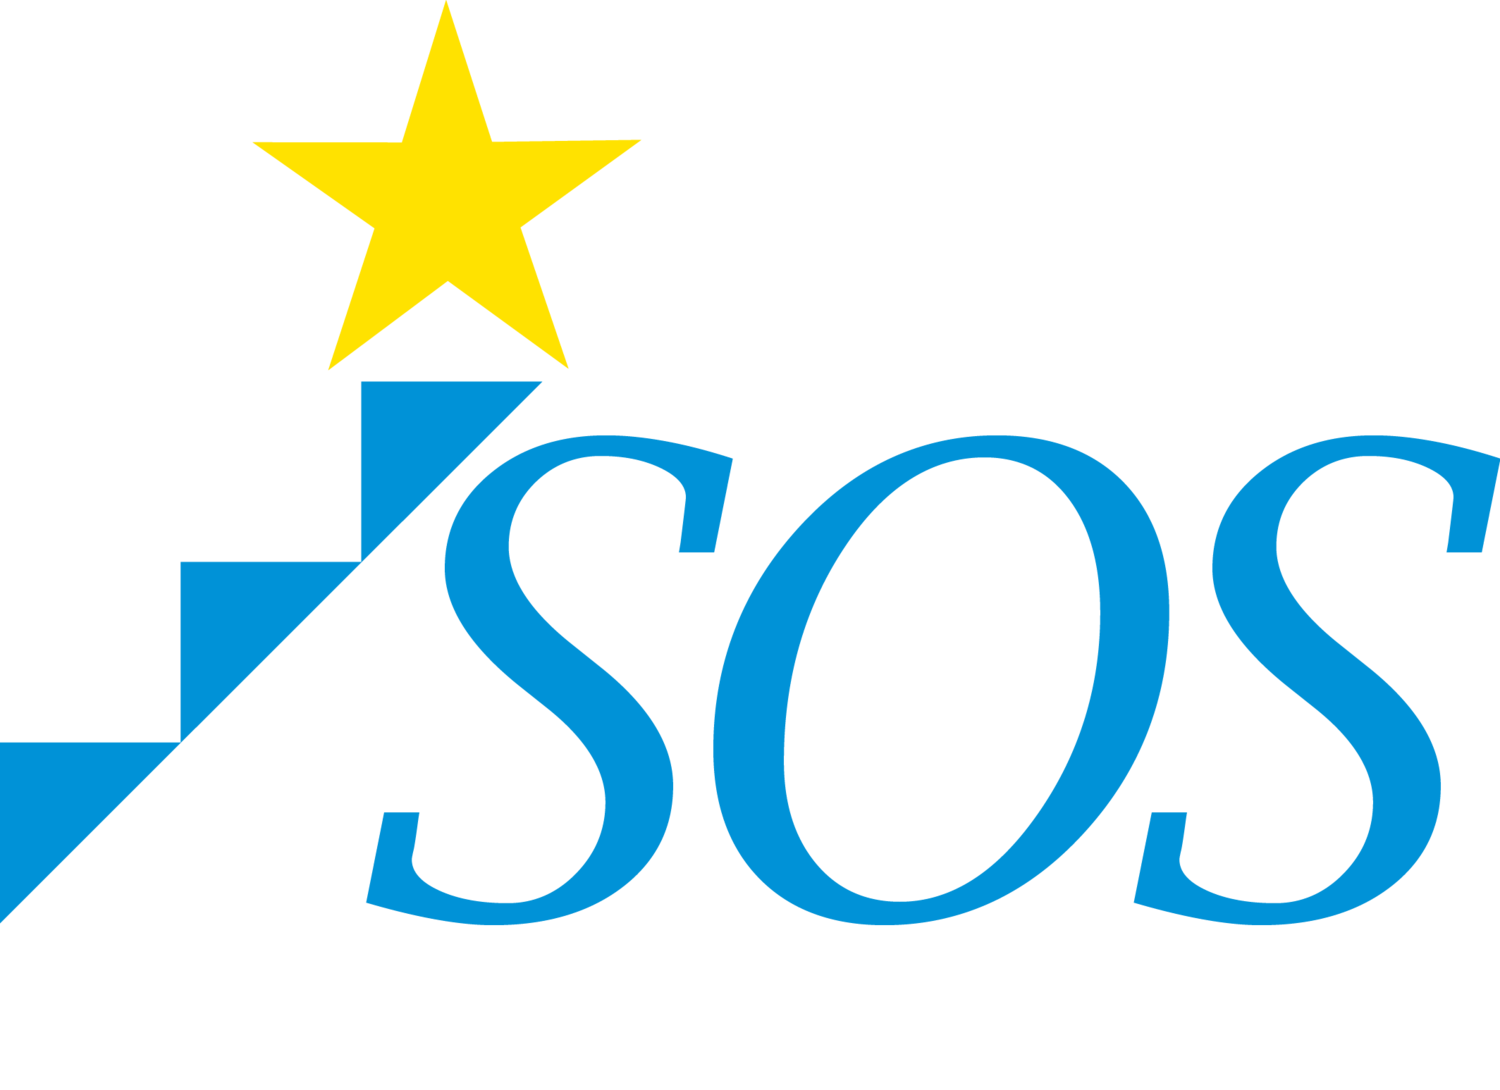 Student Organizing Solutions